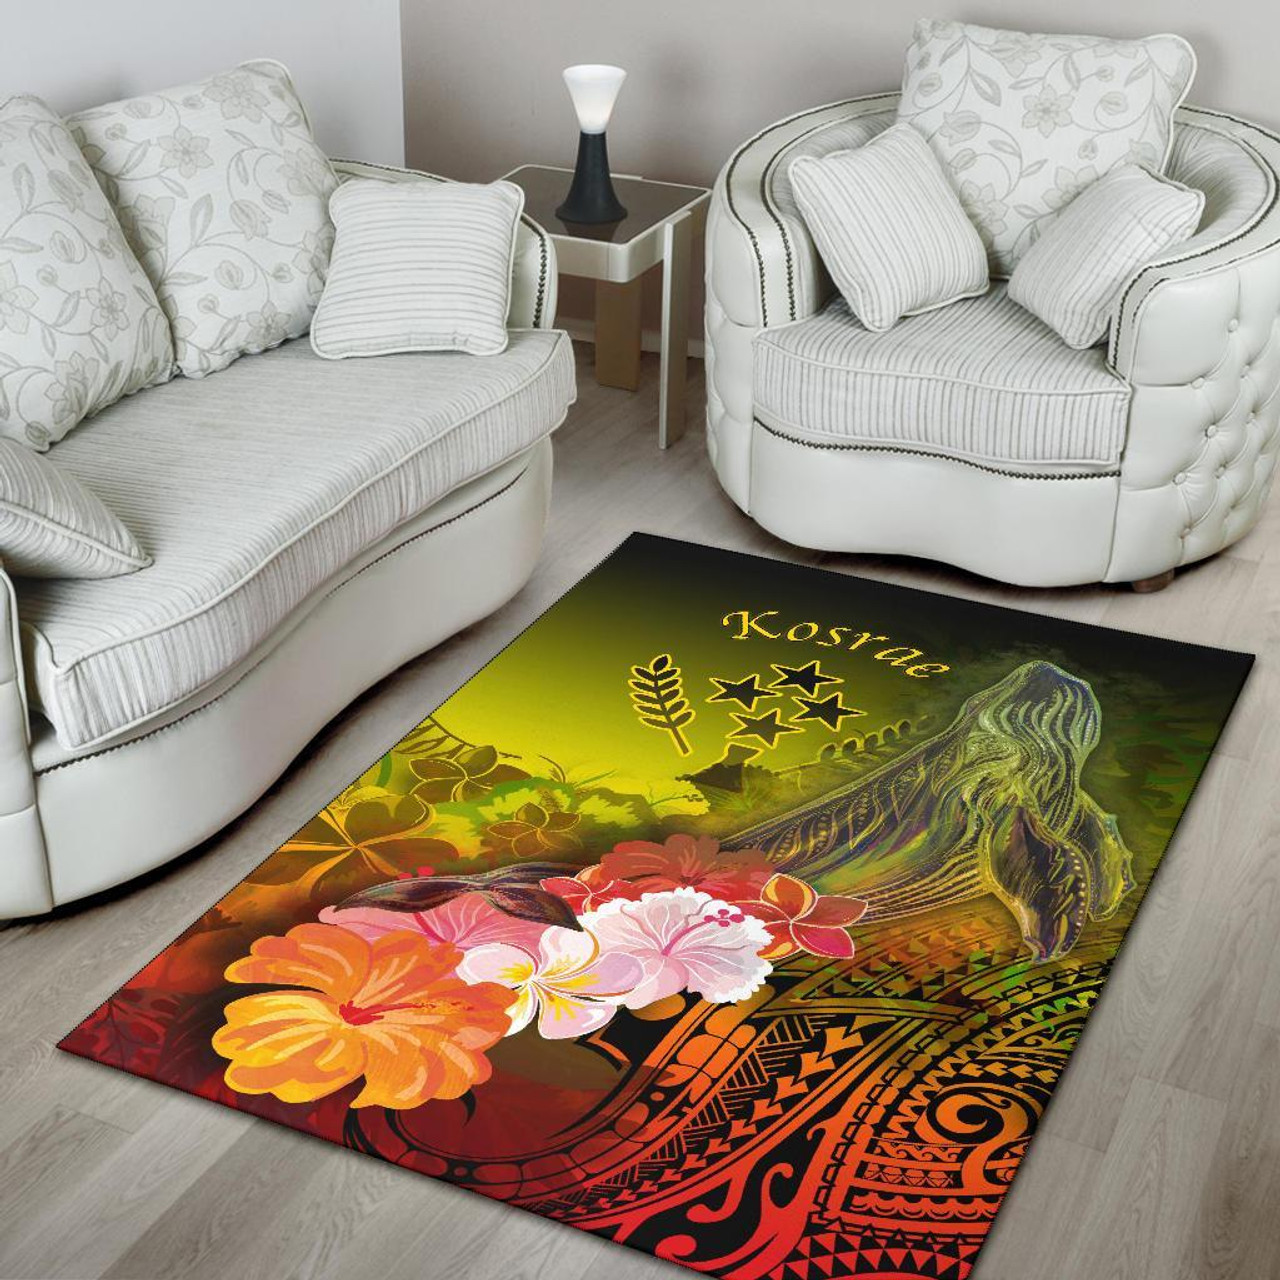 Kosrae Area Rug - Humpback Whale with Tropical Flowers (Yellow) Polynesian 4